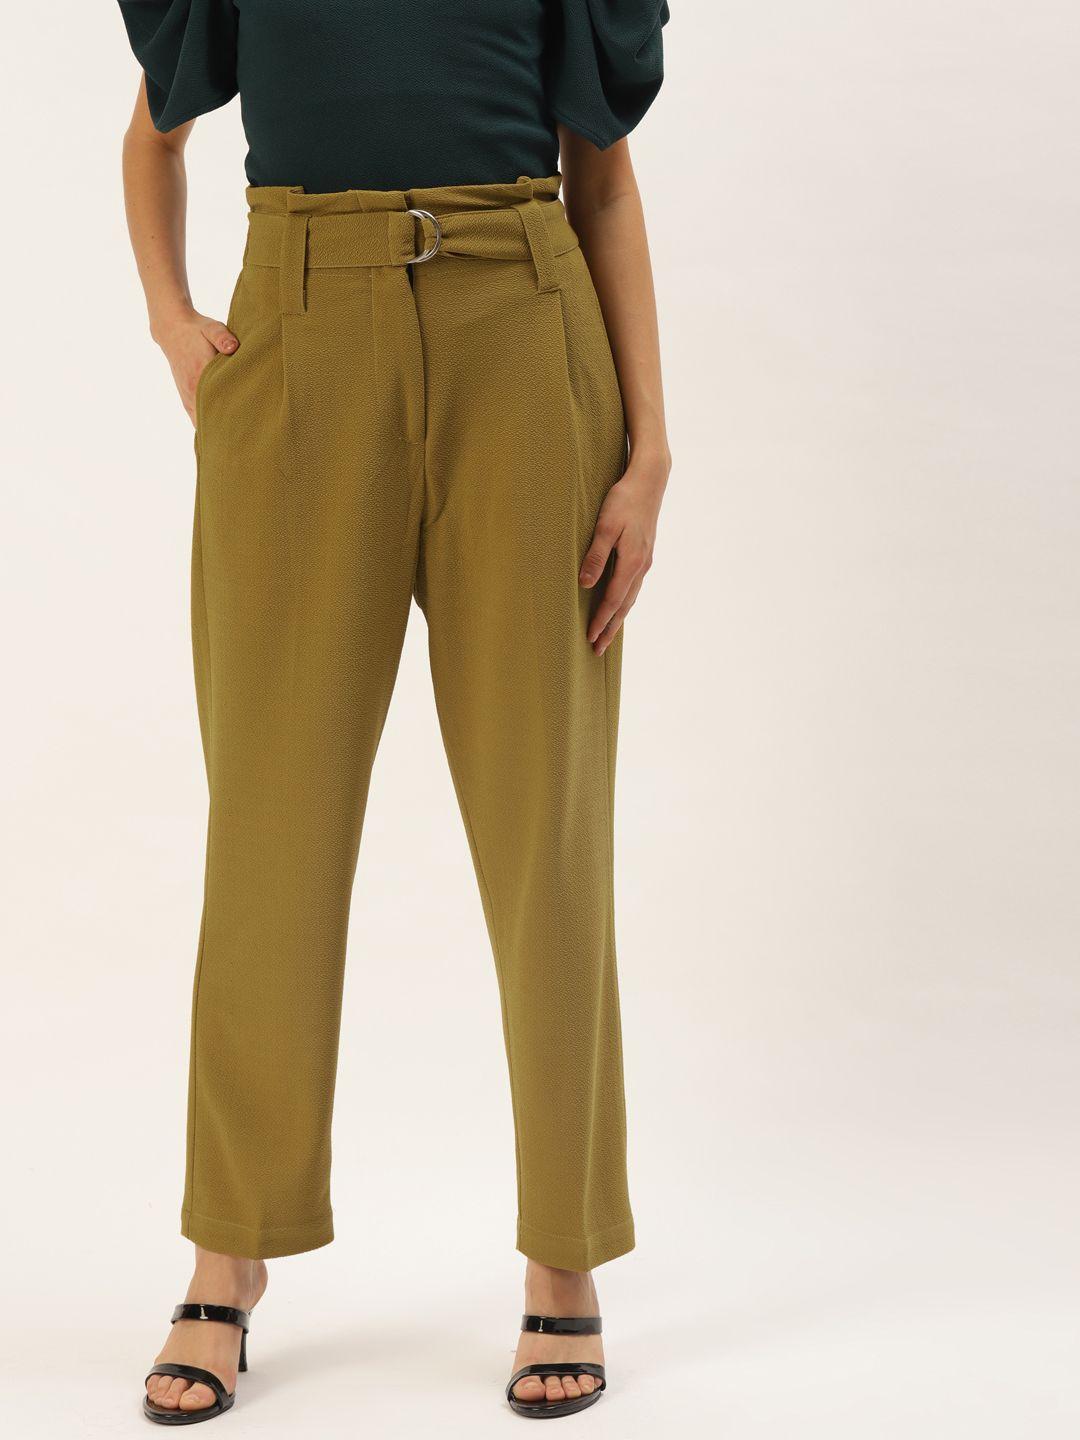 zastraa women camel brown solid slim fit culottes trousers